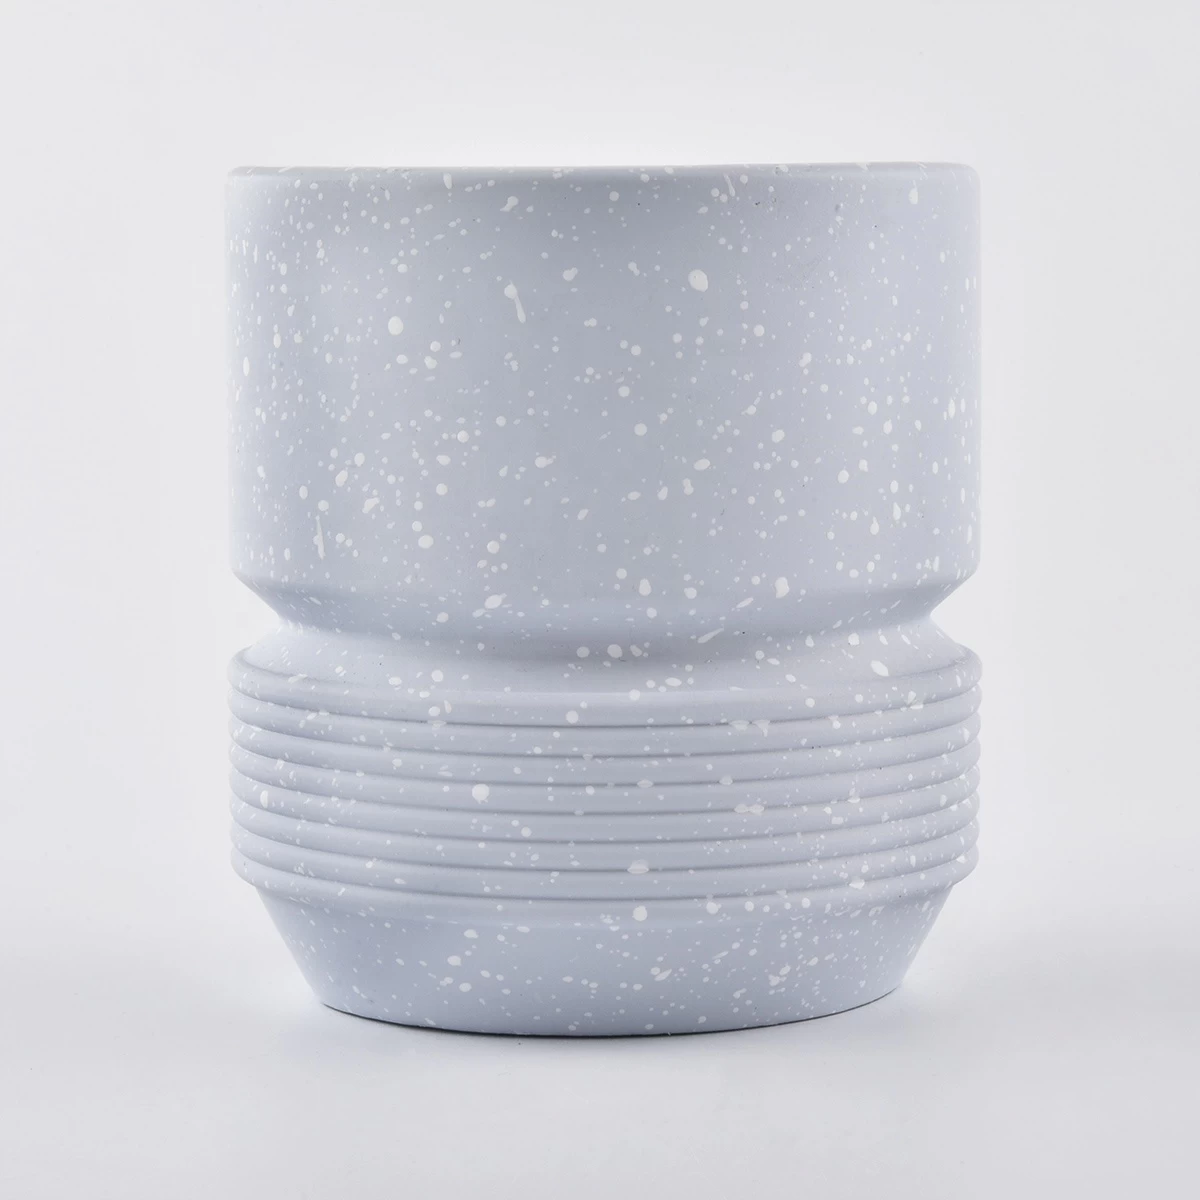 Sunny luxury empty blue cement concrete candle holders